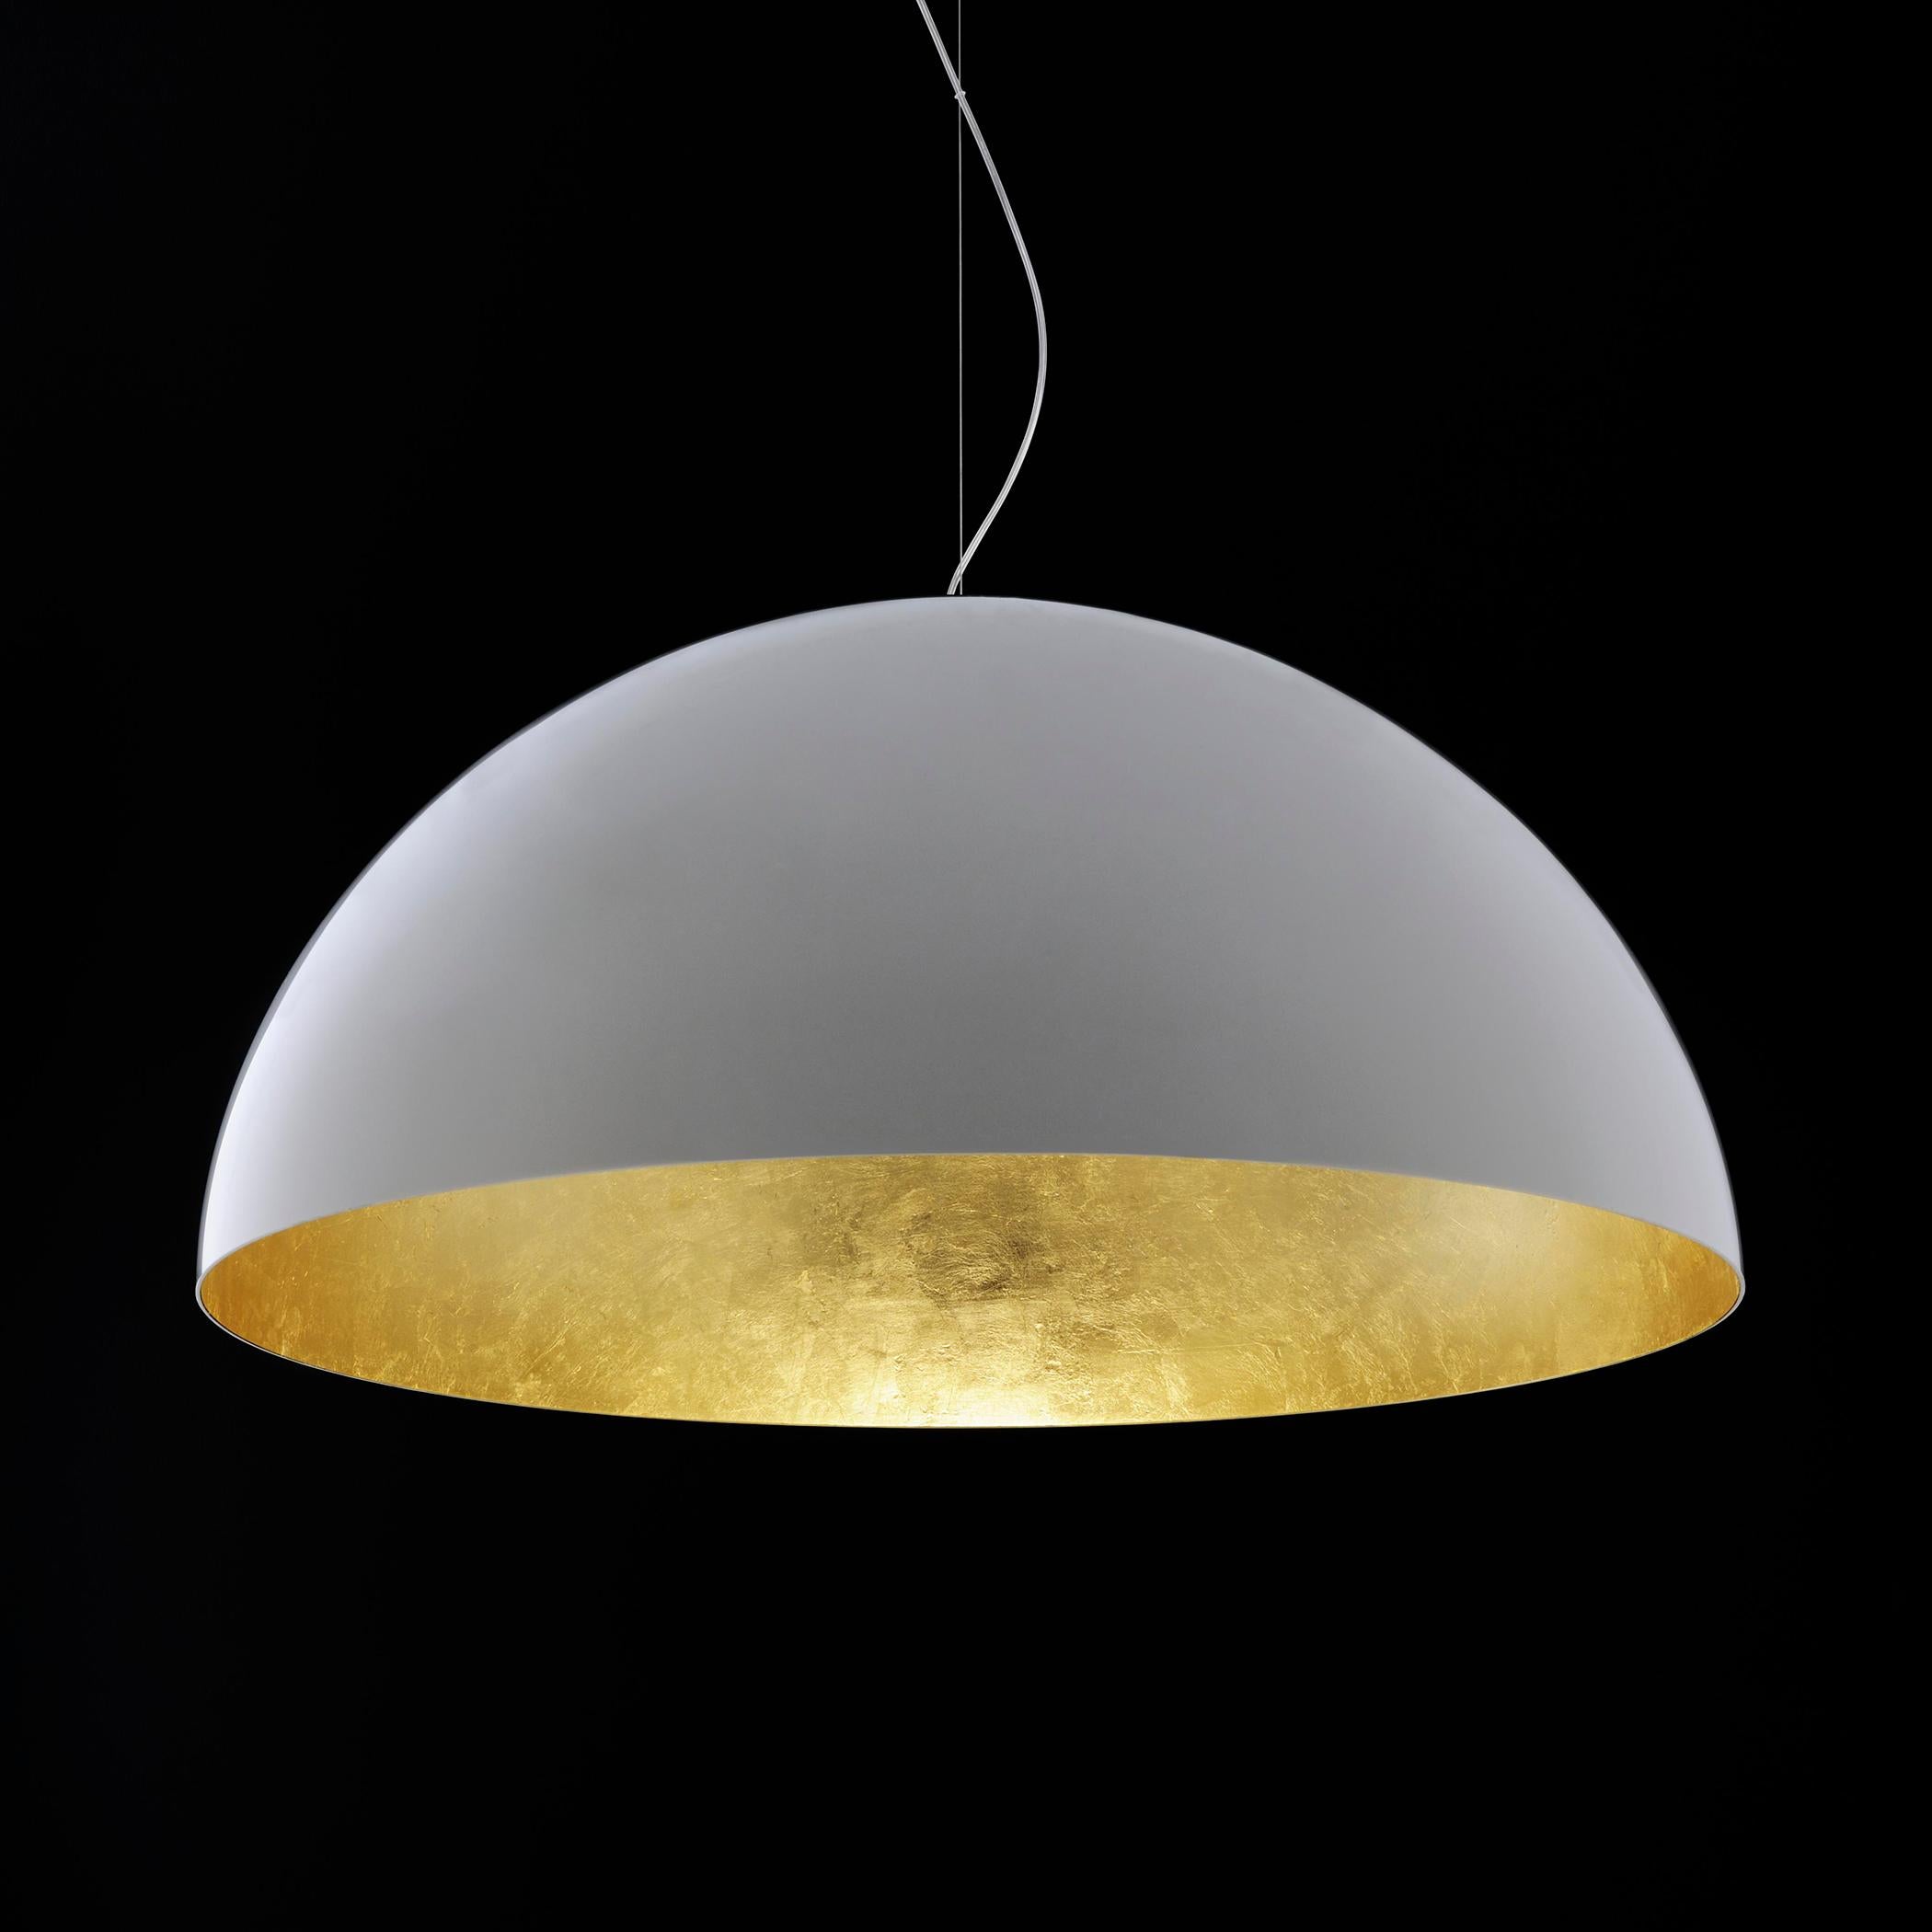 Suspension lamp 'Sonora' designed by Vico Magistretti in 1976.
Suspension lamp, giving direct and diffused light in blown PMMA. Manufactured by Oluce, Italy.

The story of Sonora is one of a pure geometrical shape, pursued by Magistretti